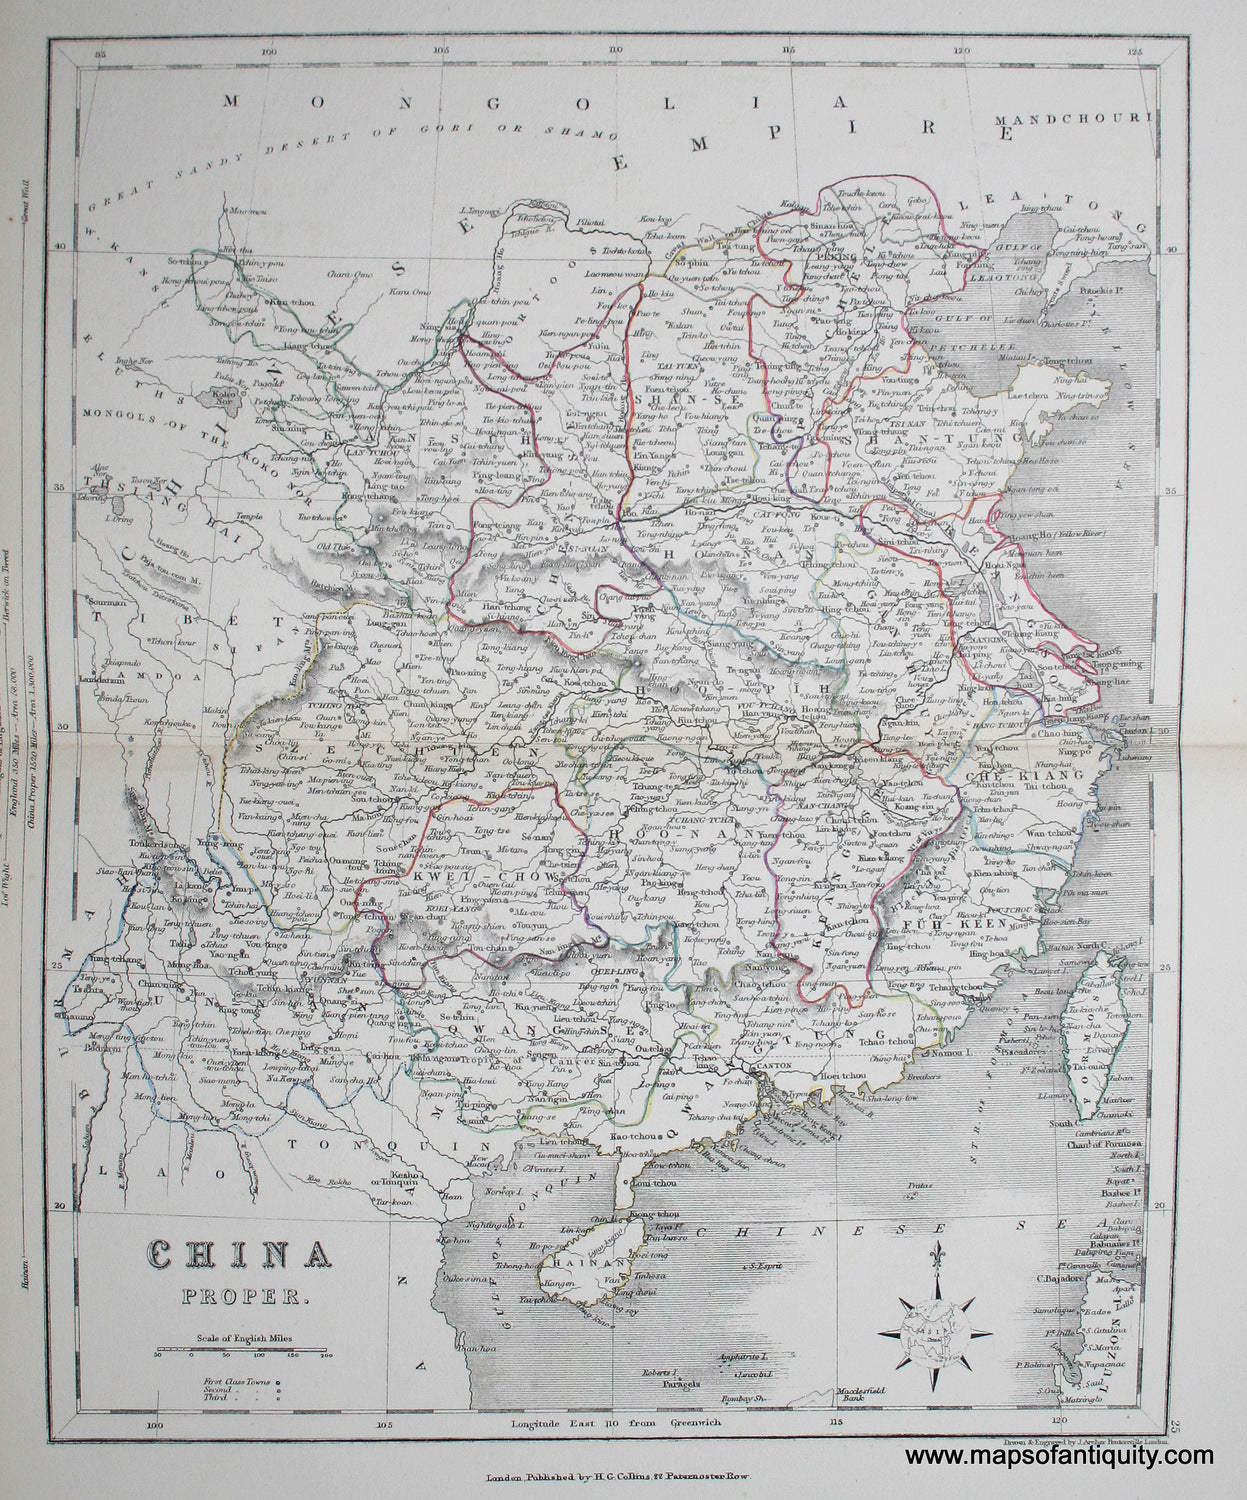 Antique-Hand-Colored-Map-China-Proper-Asia-China-c.-1850-Appleton-Maps-Of-Antiquity